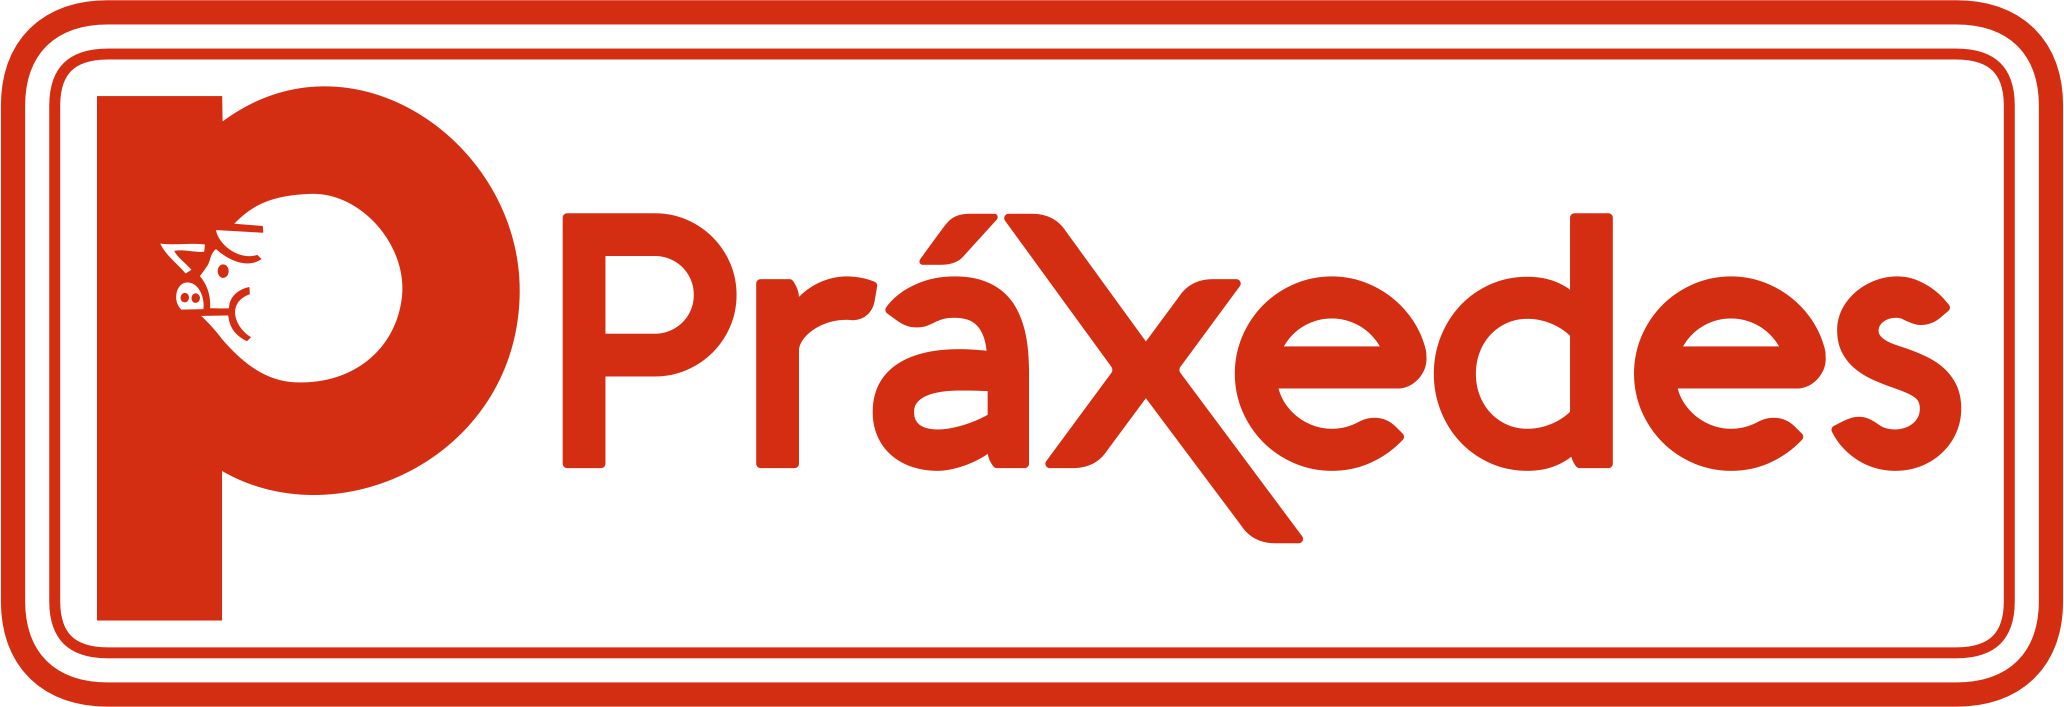 PRAXEDES FOODS